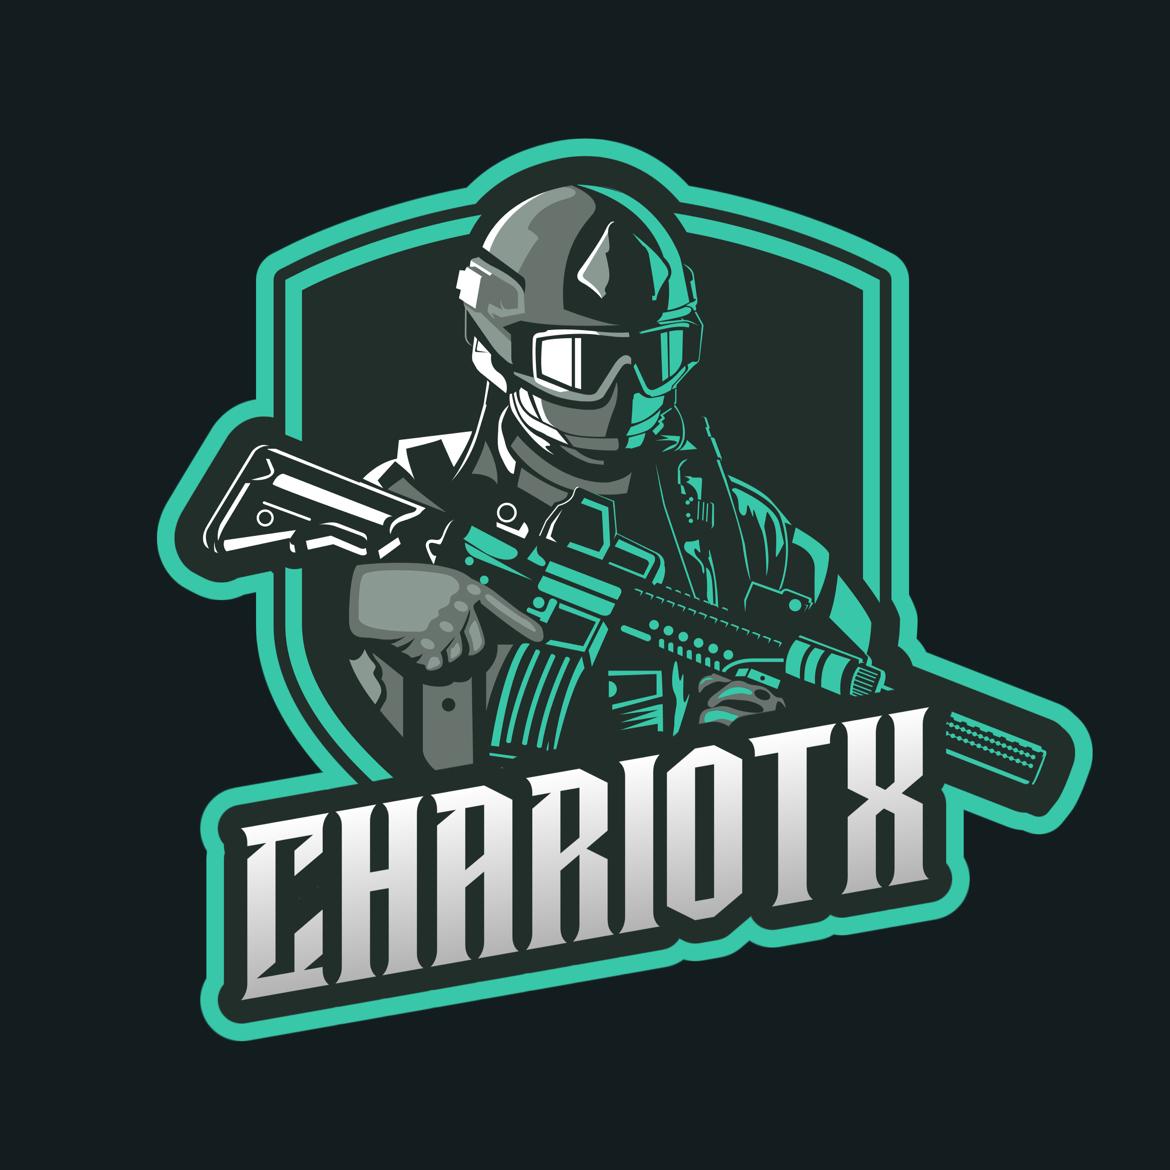 CHARIOTxGAMING's images